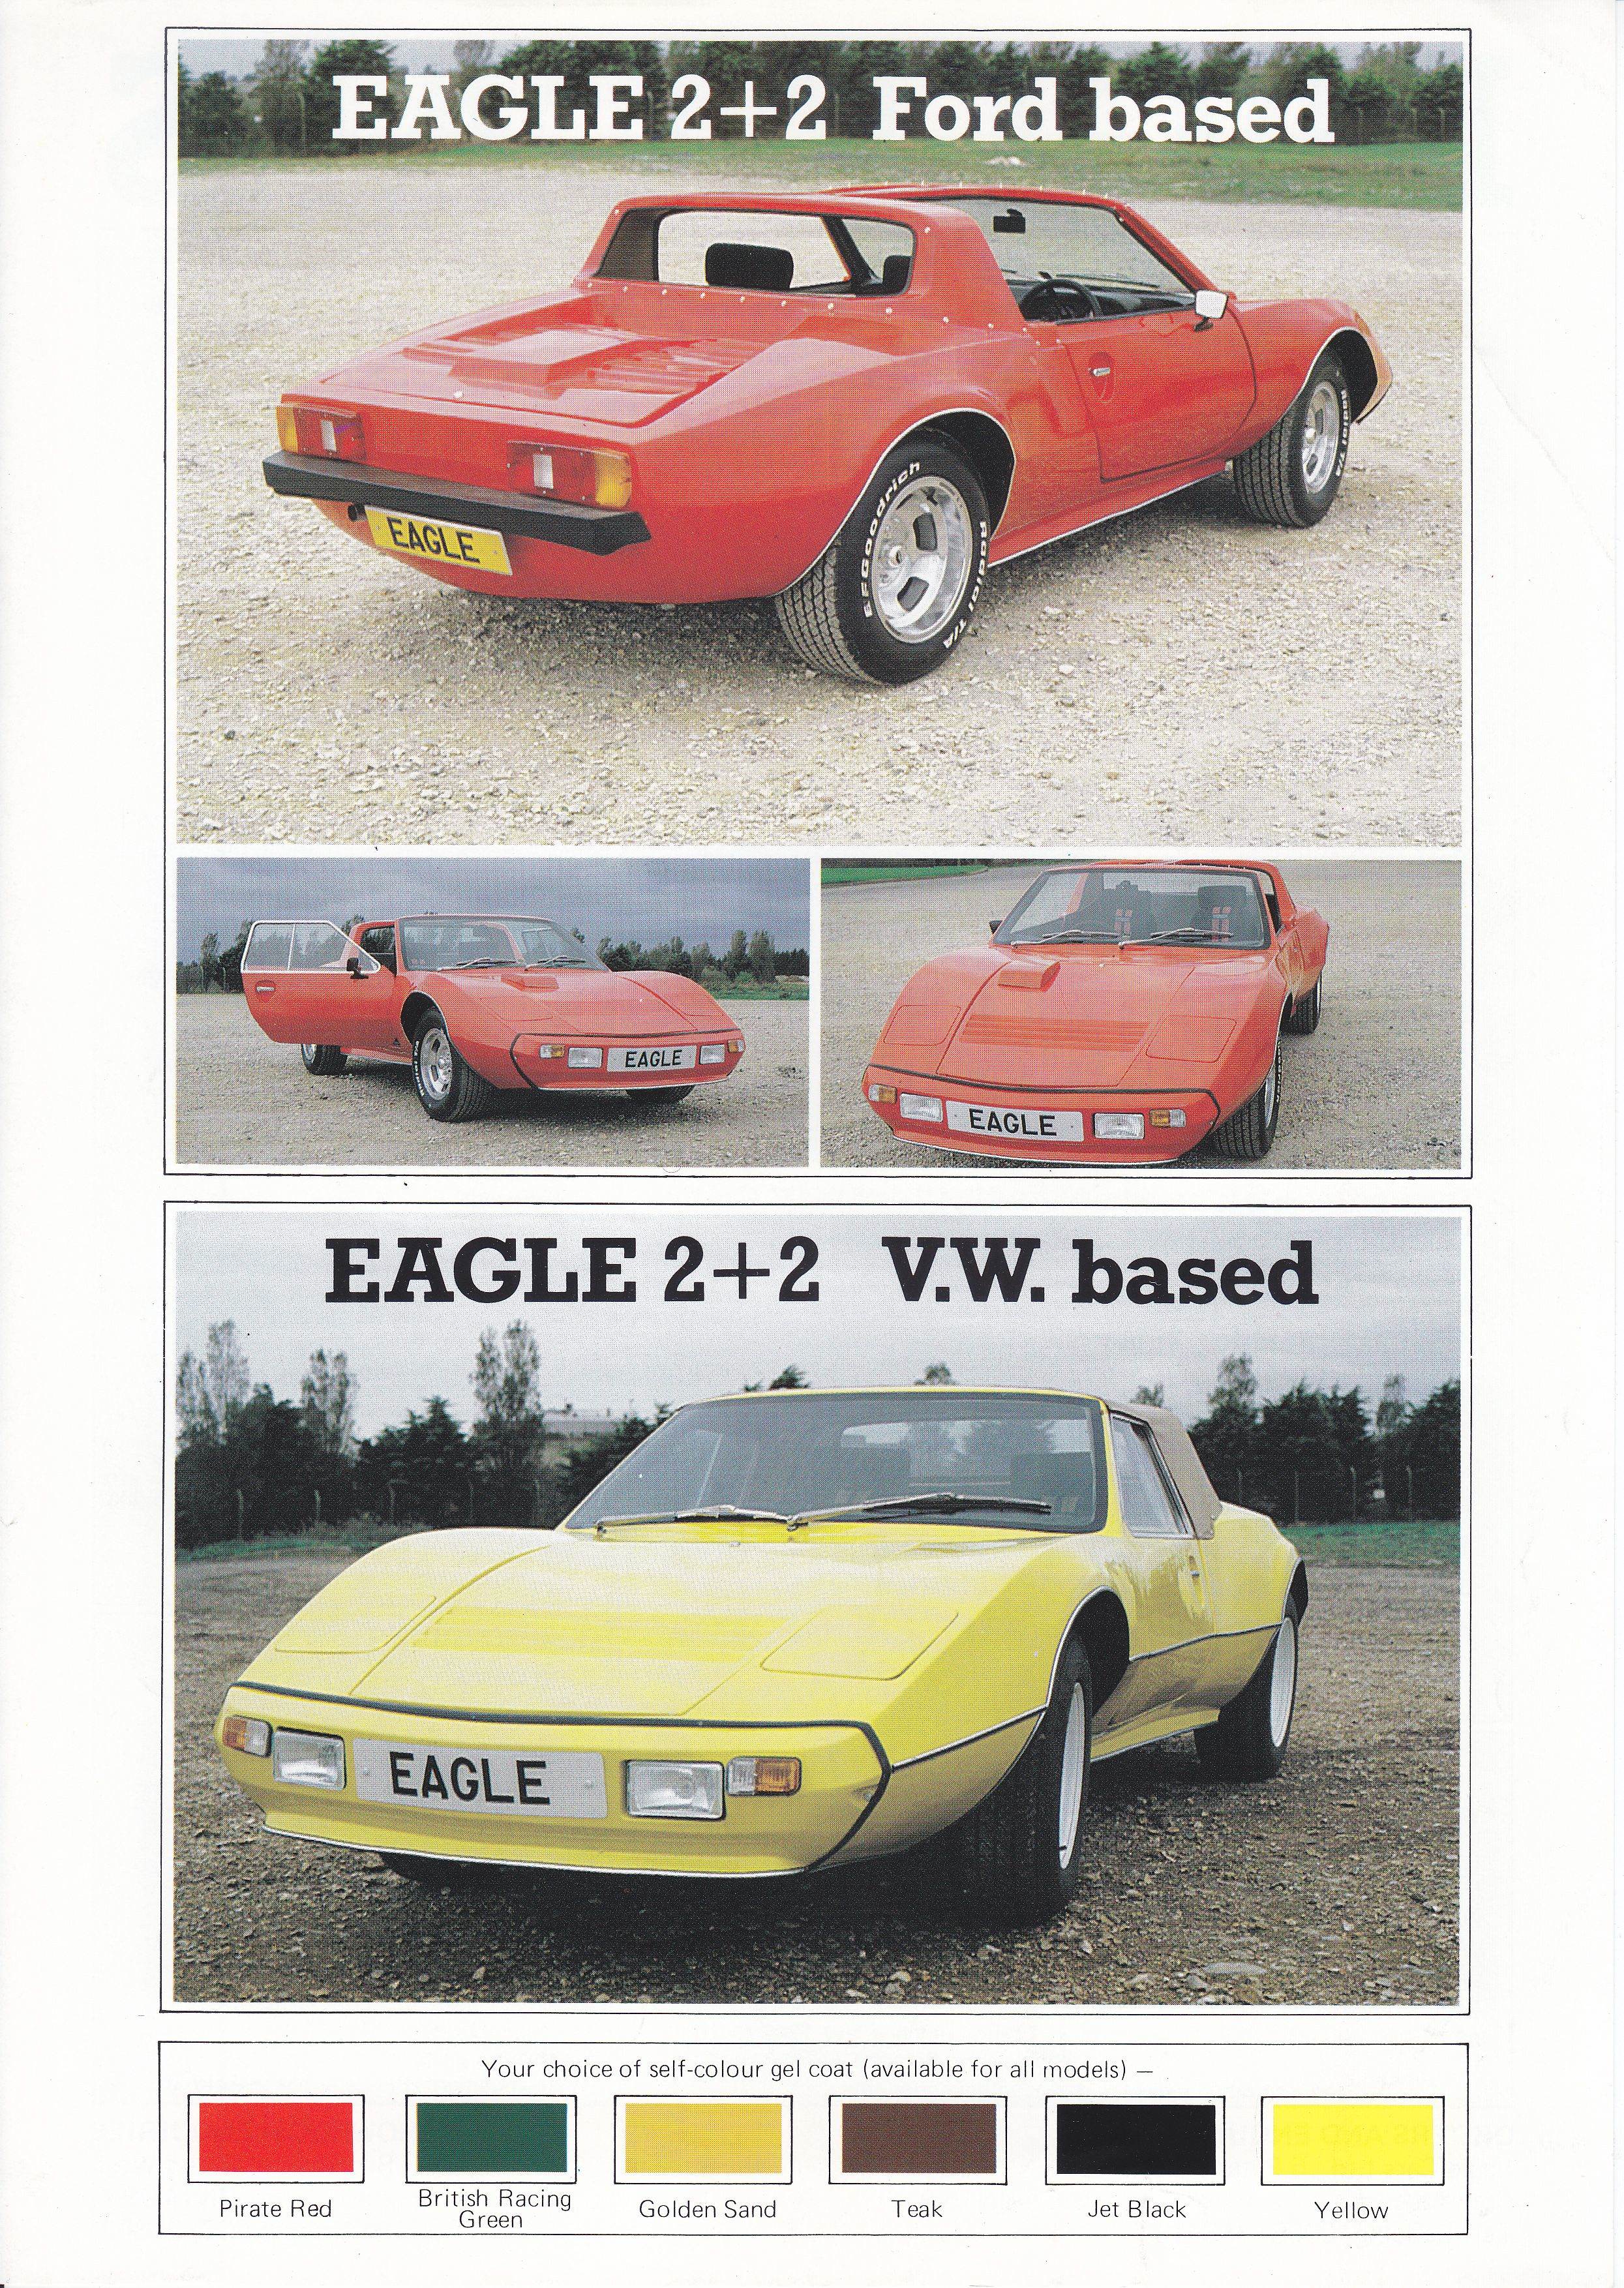 Ringing kits for sale on ebay...No not on our watch! - Page 138 - General Gassing - PistonHeads